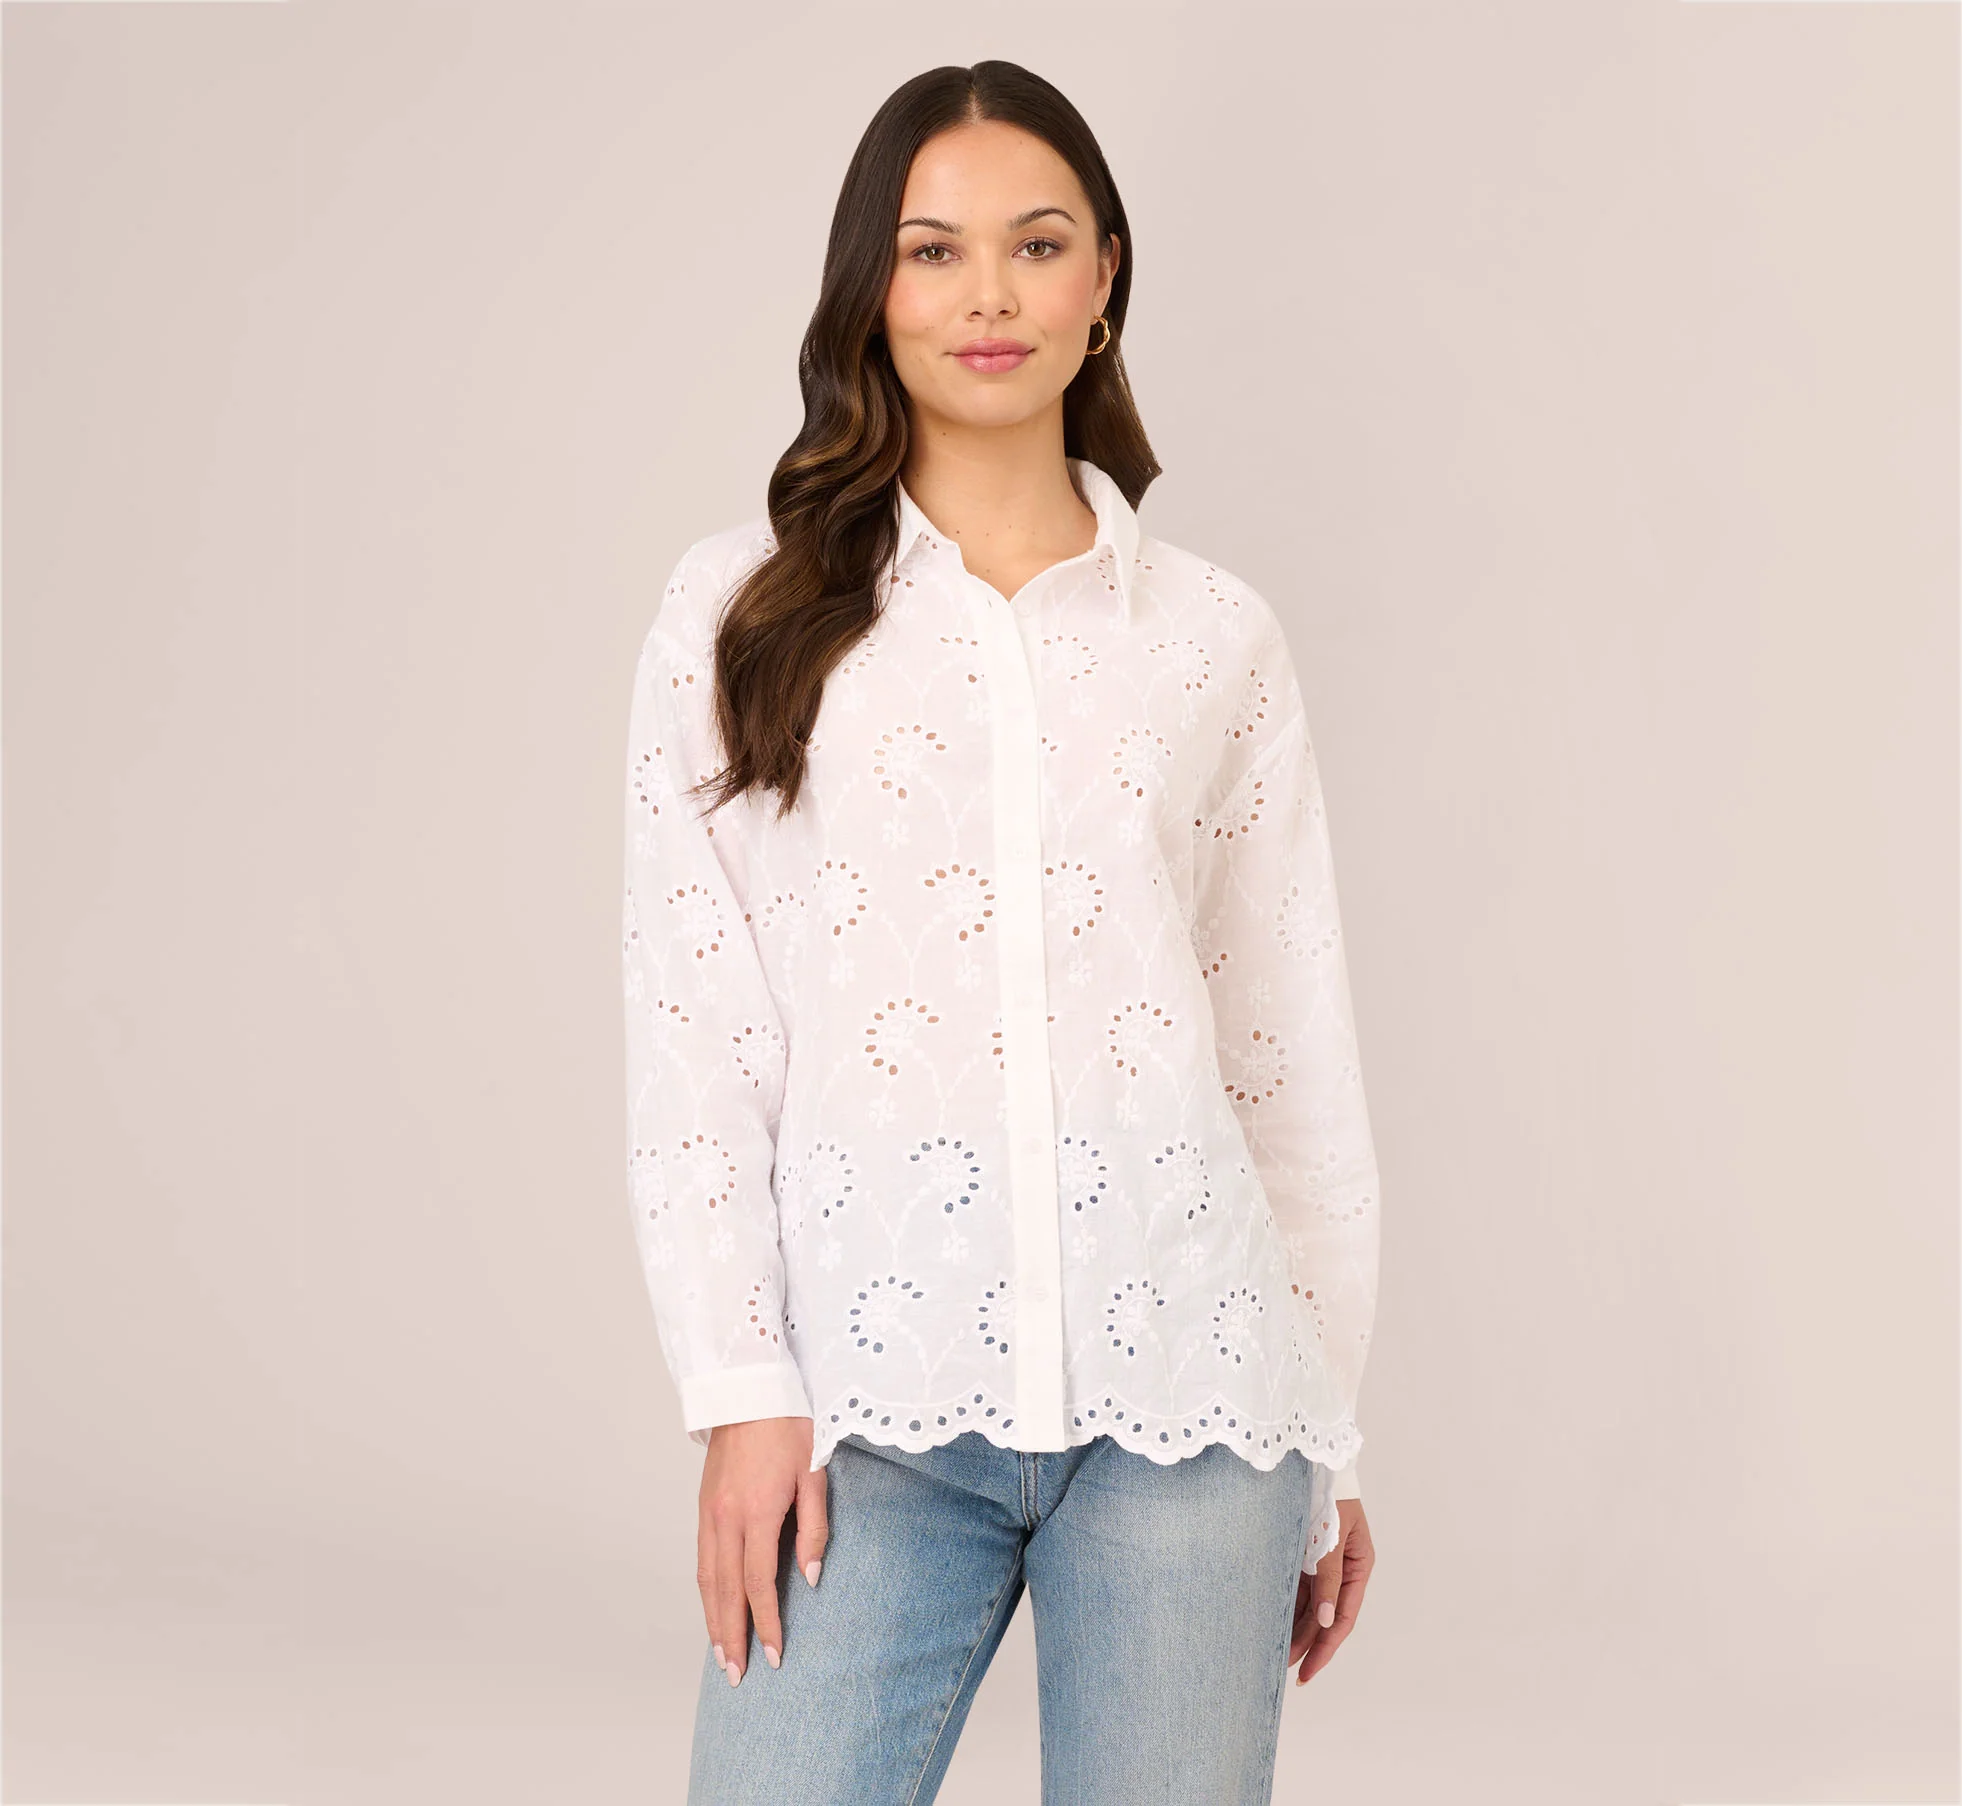 BUTTON DOWN EYELET TOP WITH LONG SLEEVES IN WHITE